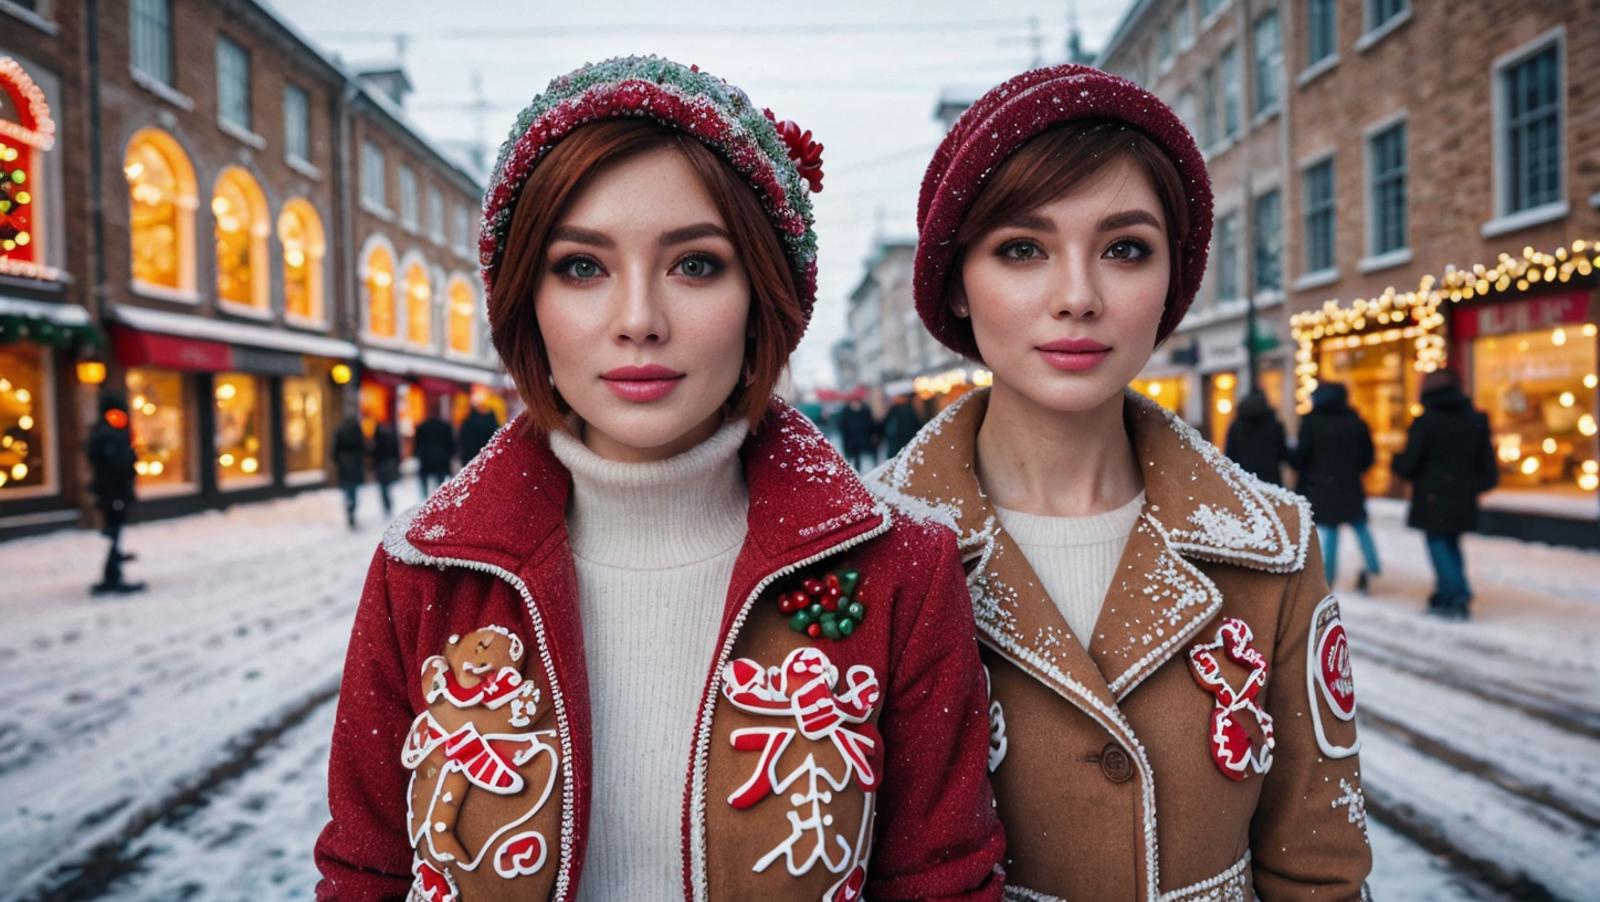 🎄🍪Gingerbread Fashion🍪🎄 image by Vovaldi